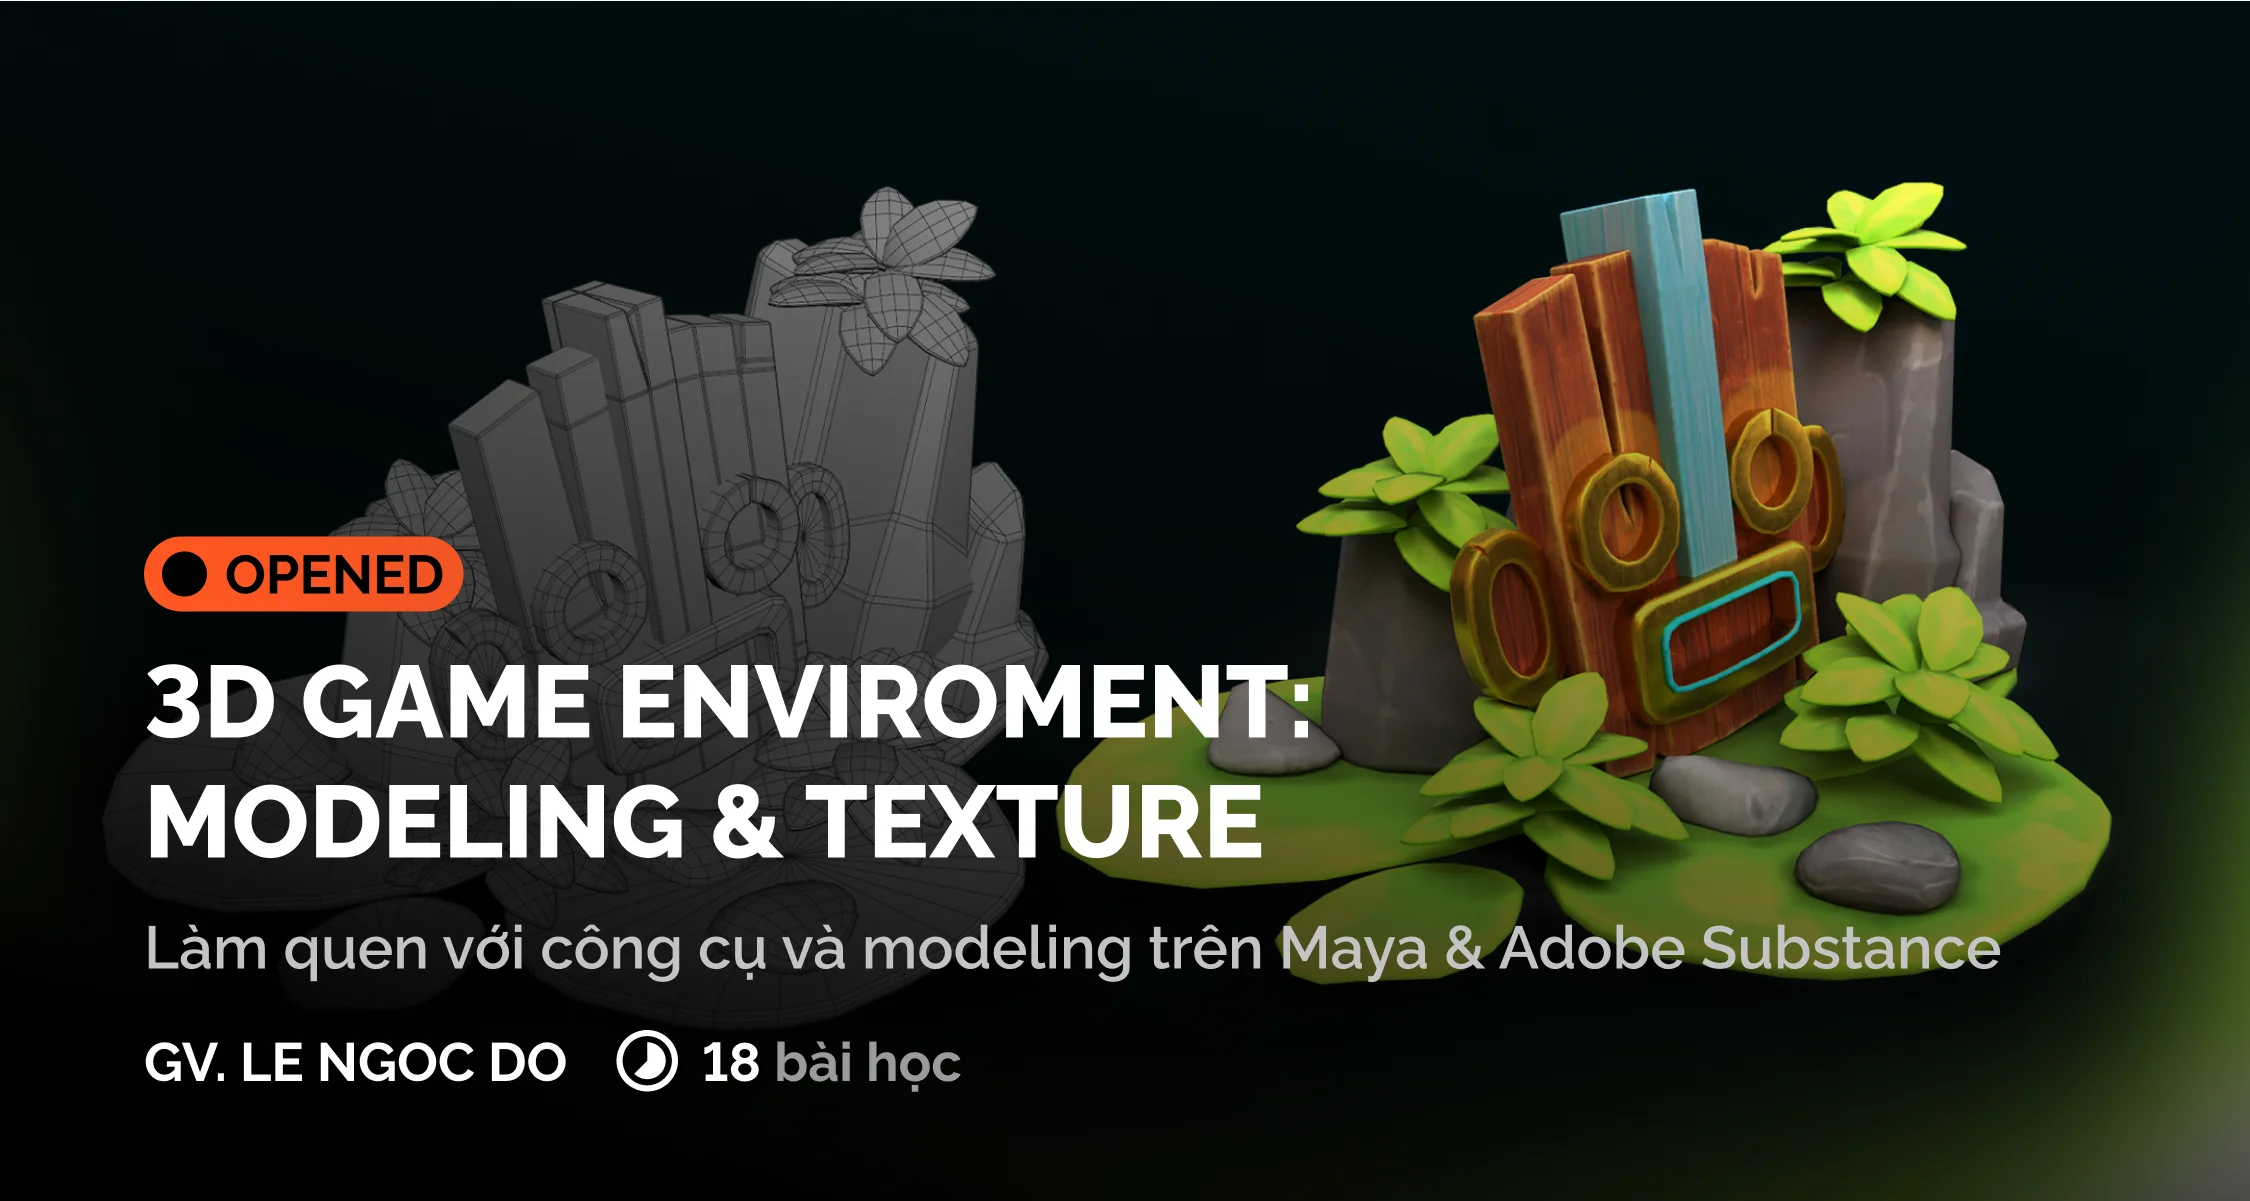 3D GAME EVIRONMENT: MODELING & TEXTURE